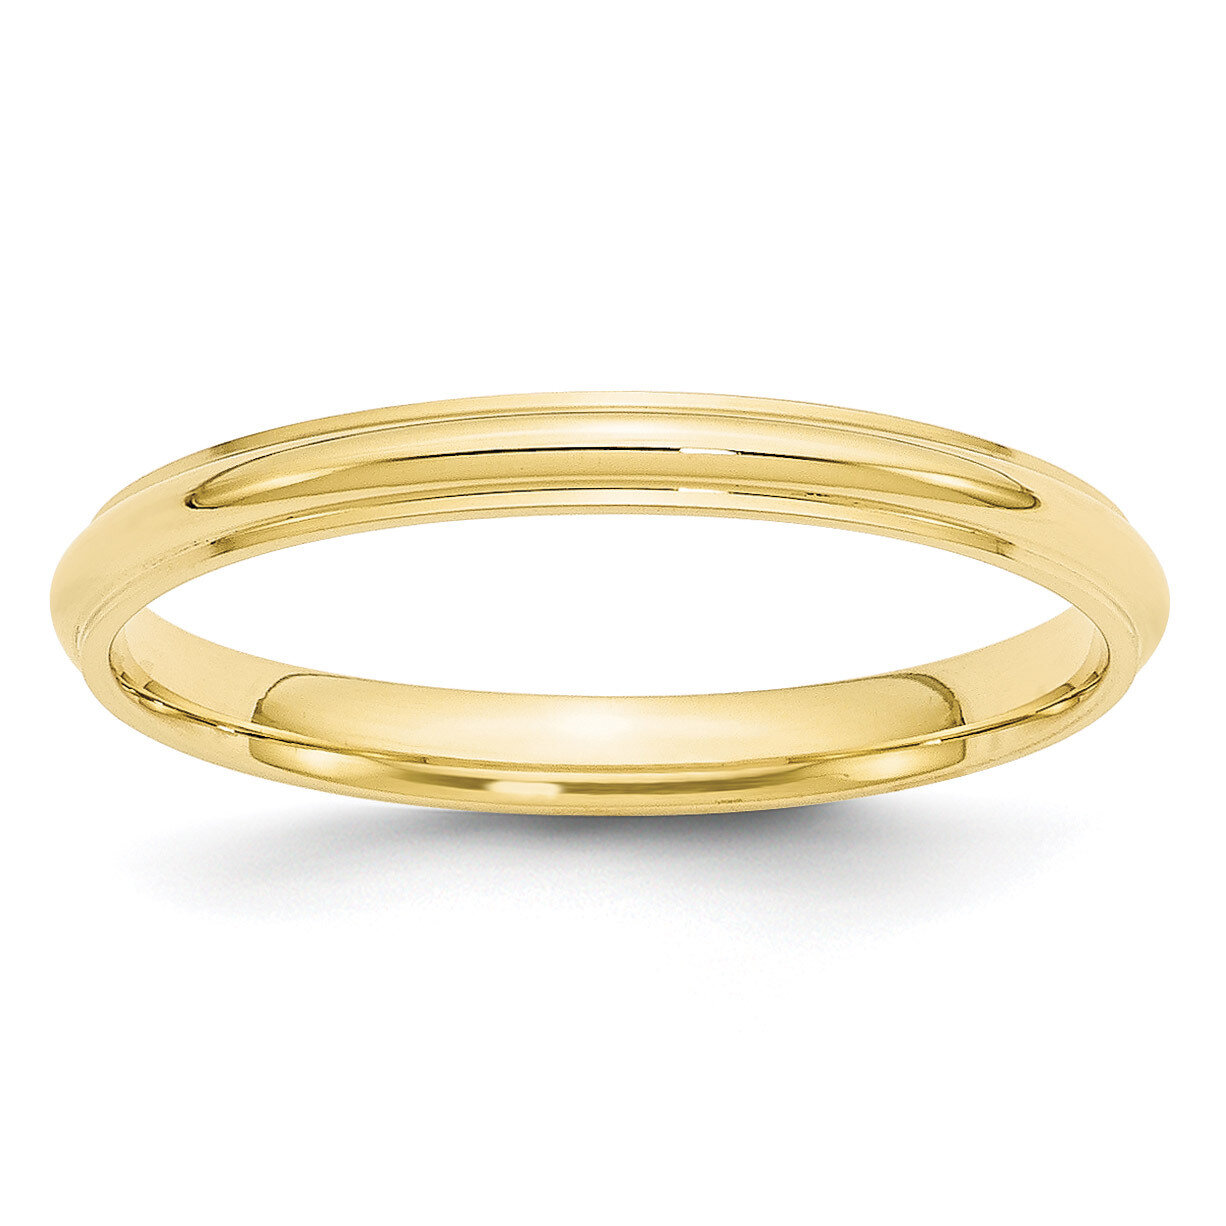 2.5mm Half Round with Edge Band 10k Yellow Gold 1HRE025 Engravable